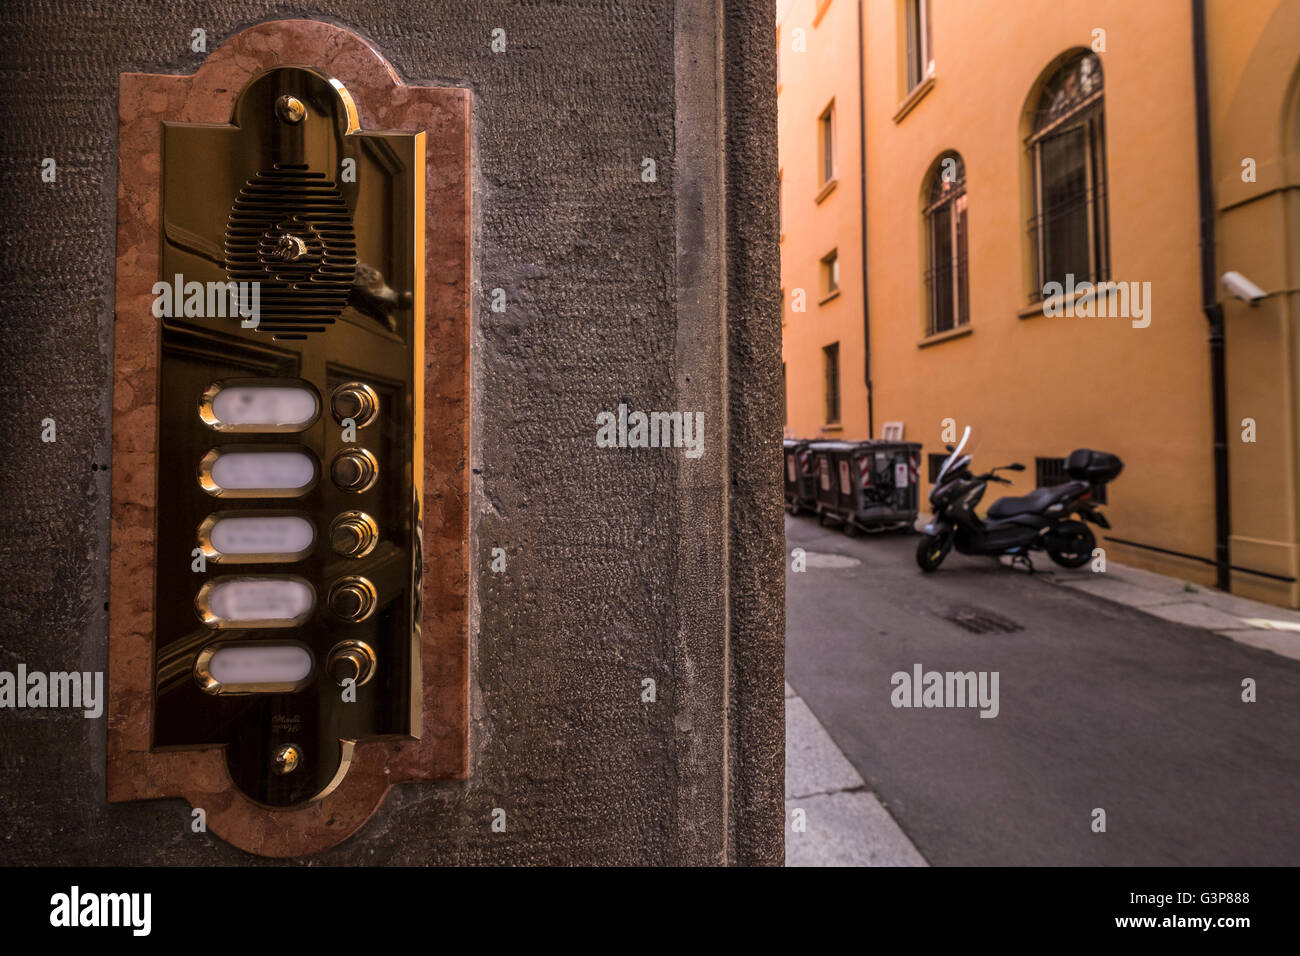 Highly polished shiny brass doorbell intercom at front door of apartment building in Bologna, Italy, with names blurred. Stock Photo